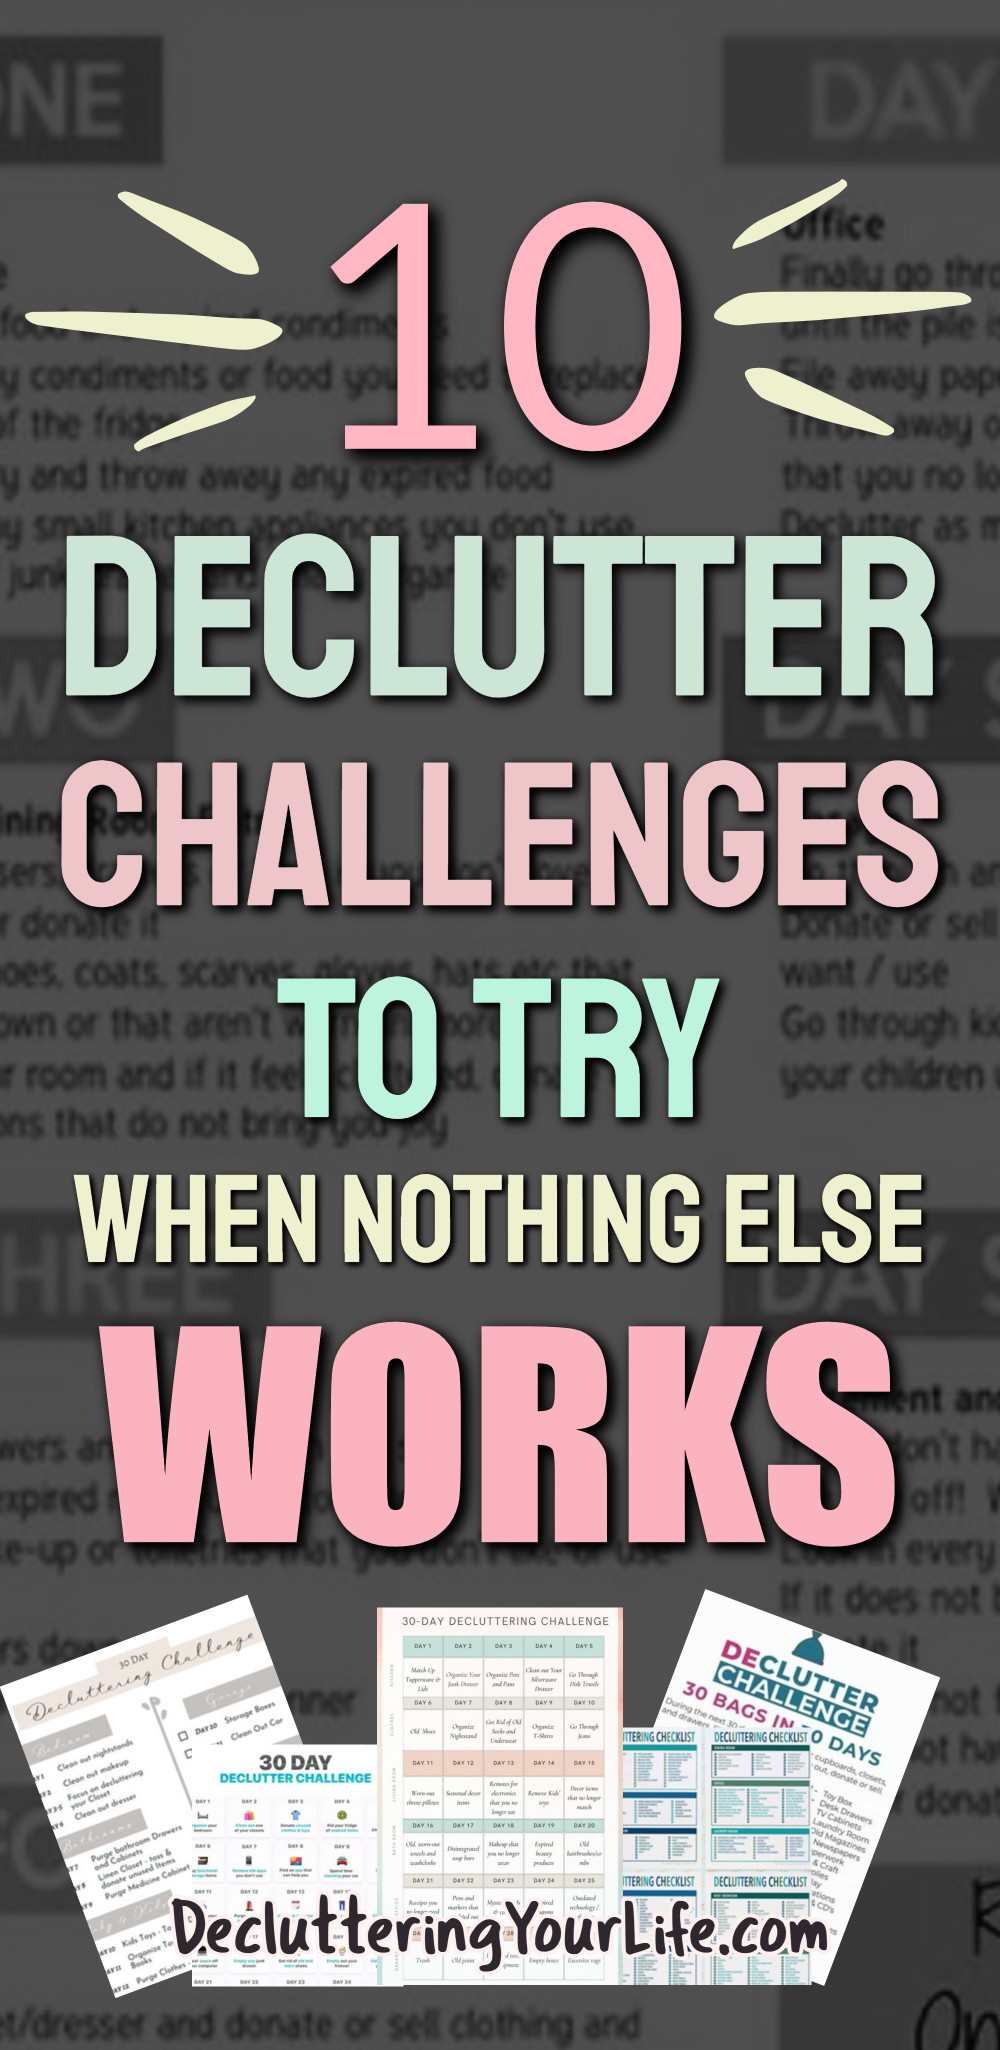 10 Declutter Challenges To Try When Nothing Else Works